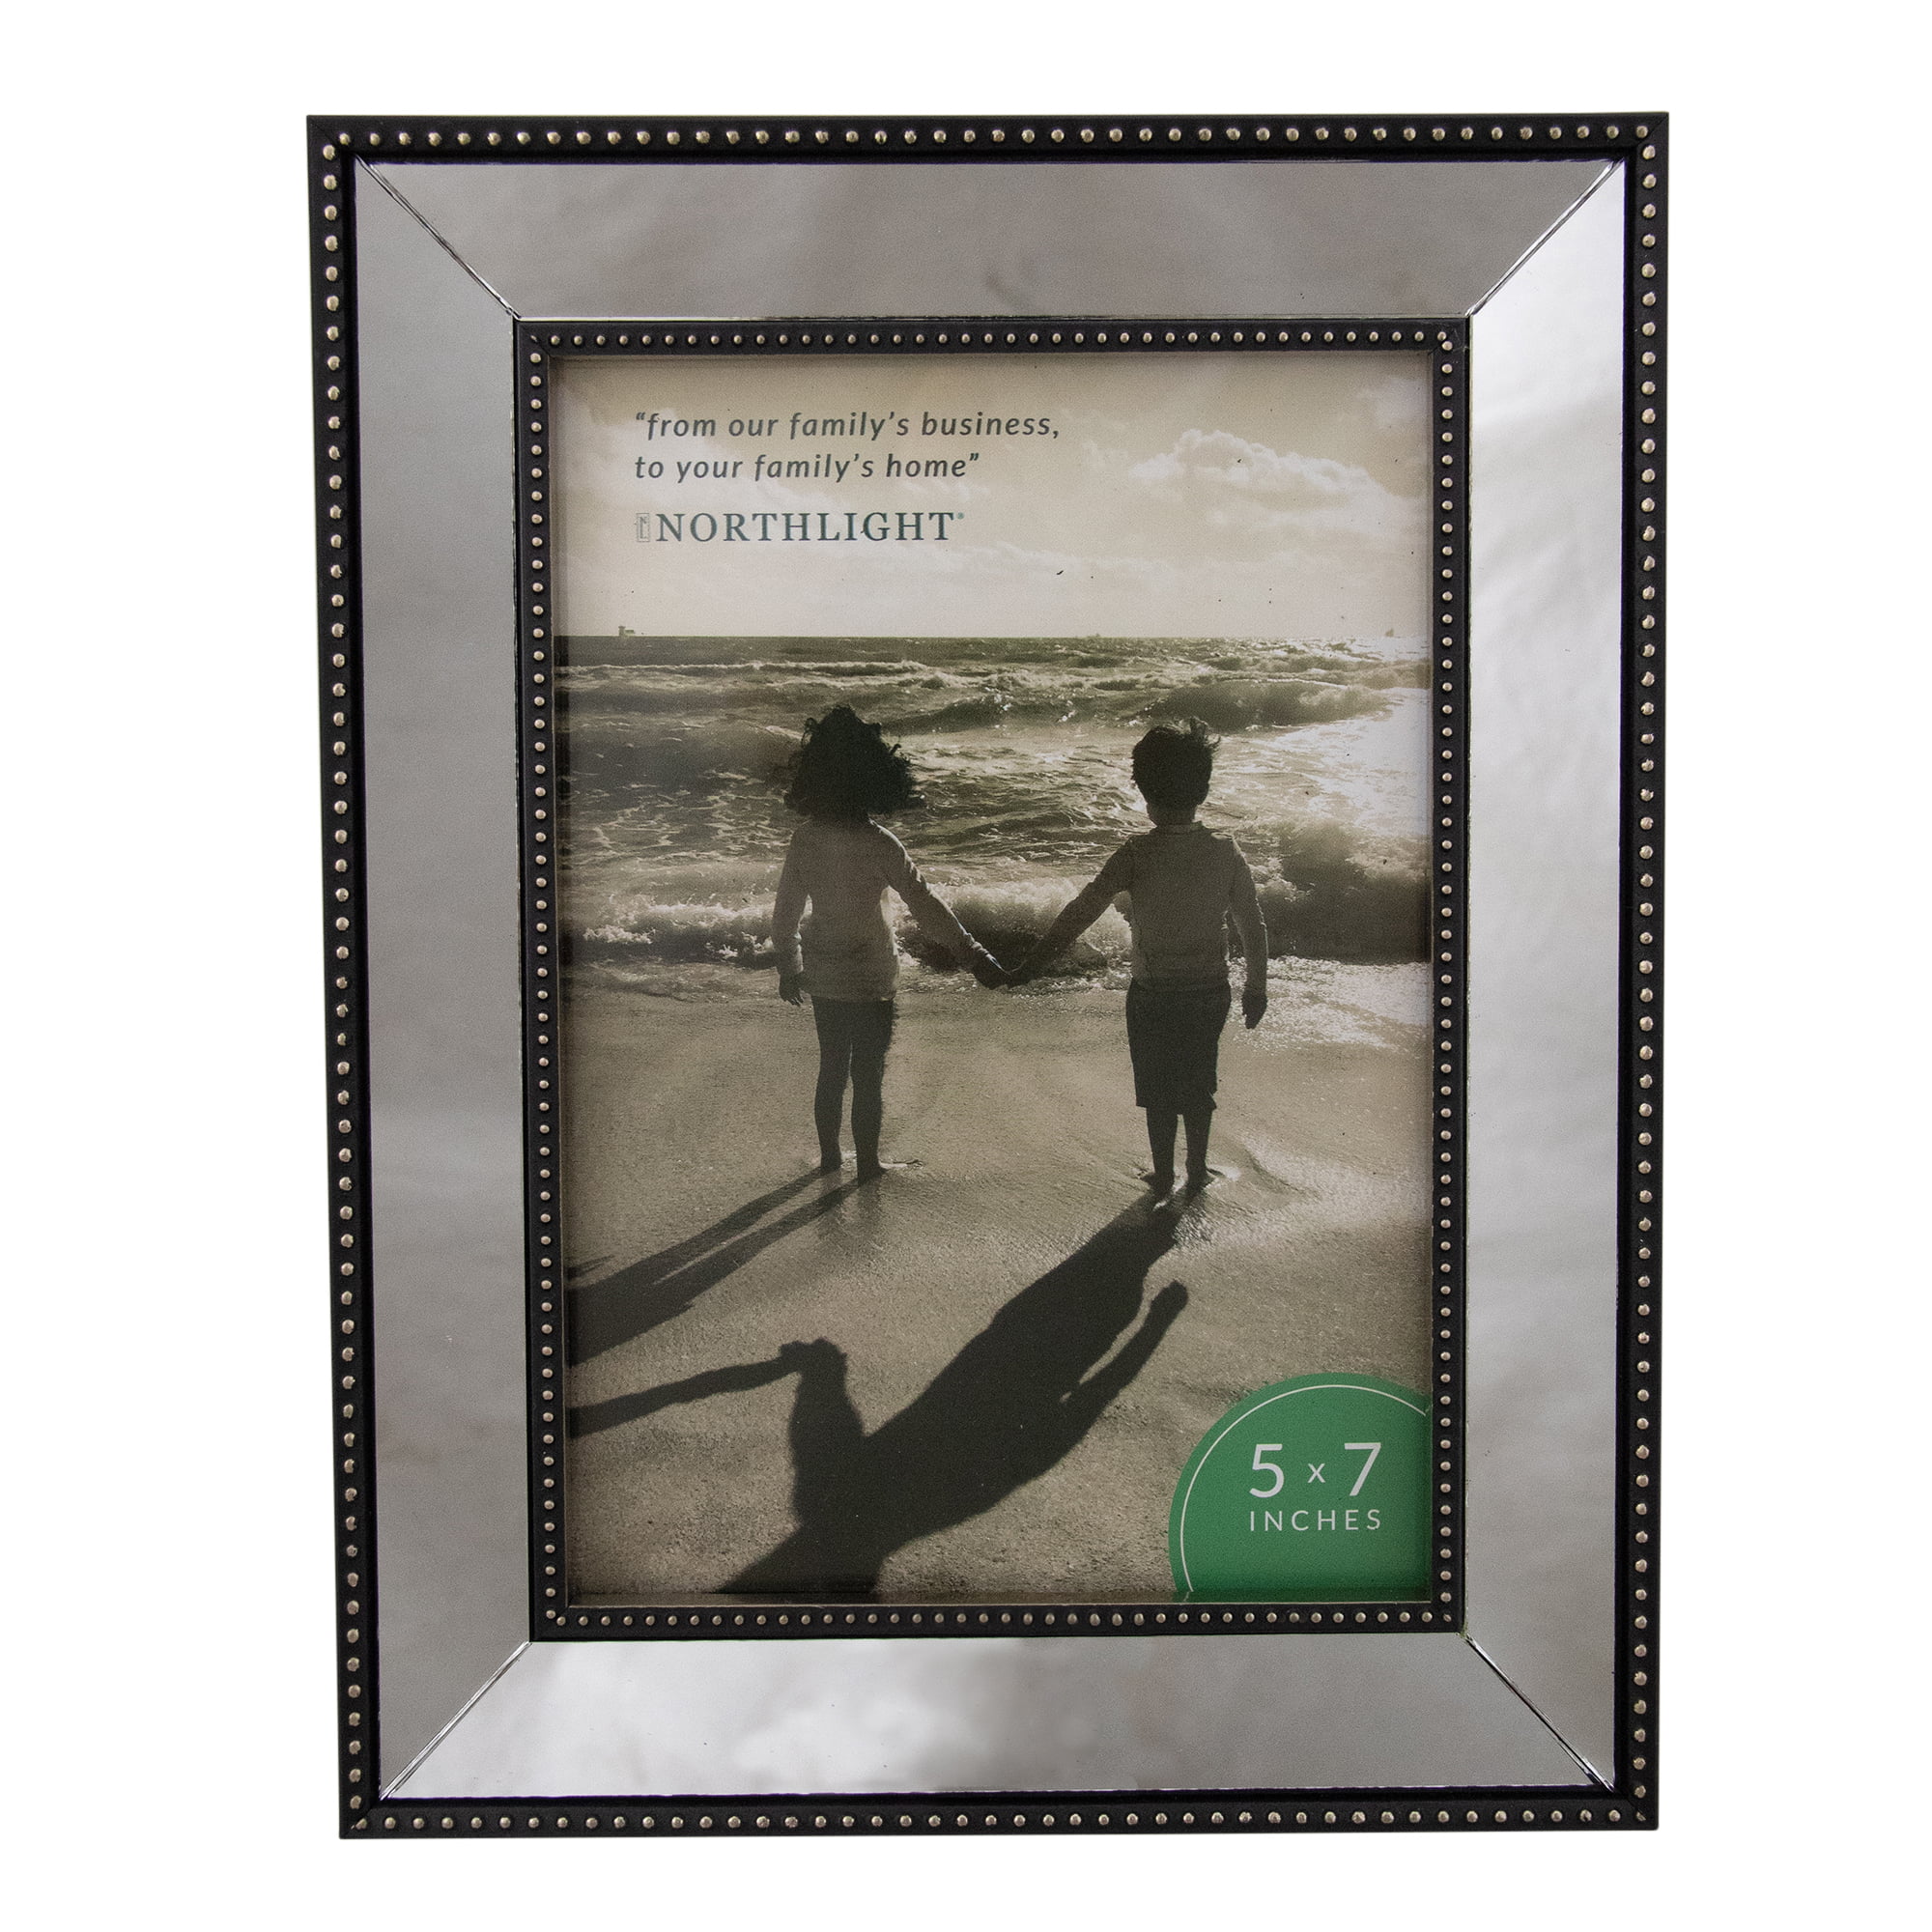 5 x 7-Inch Displays2go Reflective Pattern on Border Glass Lens Silver Photo Frames Pack of 6 or 9 